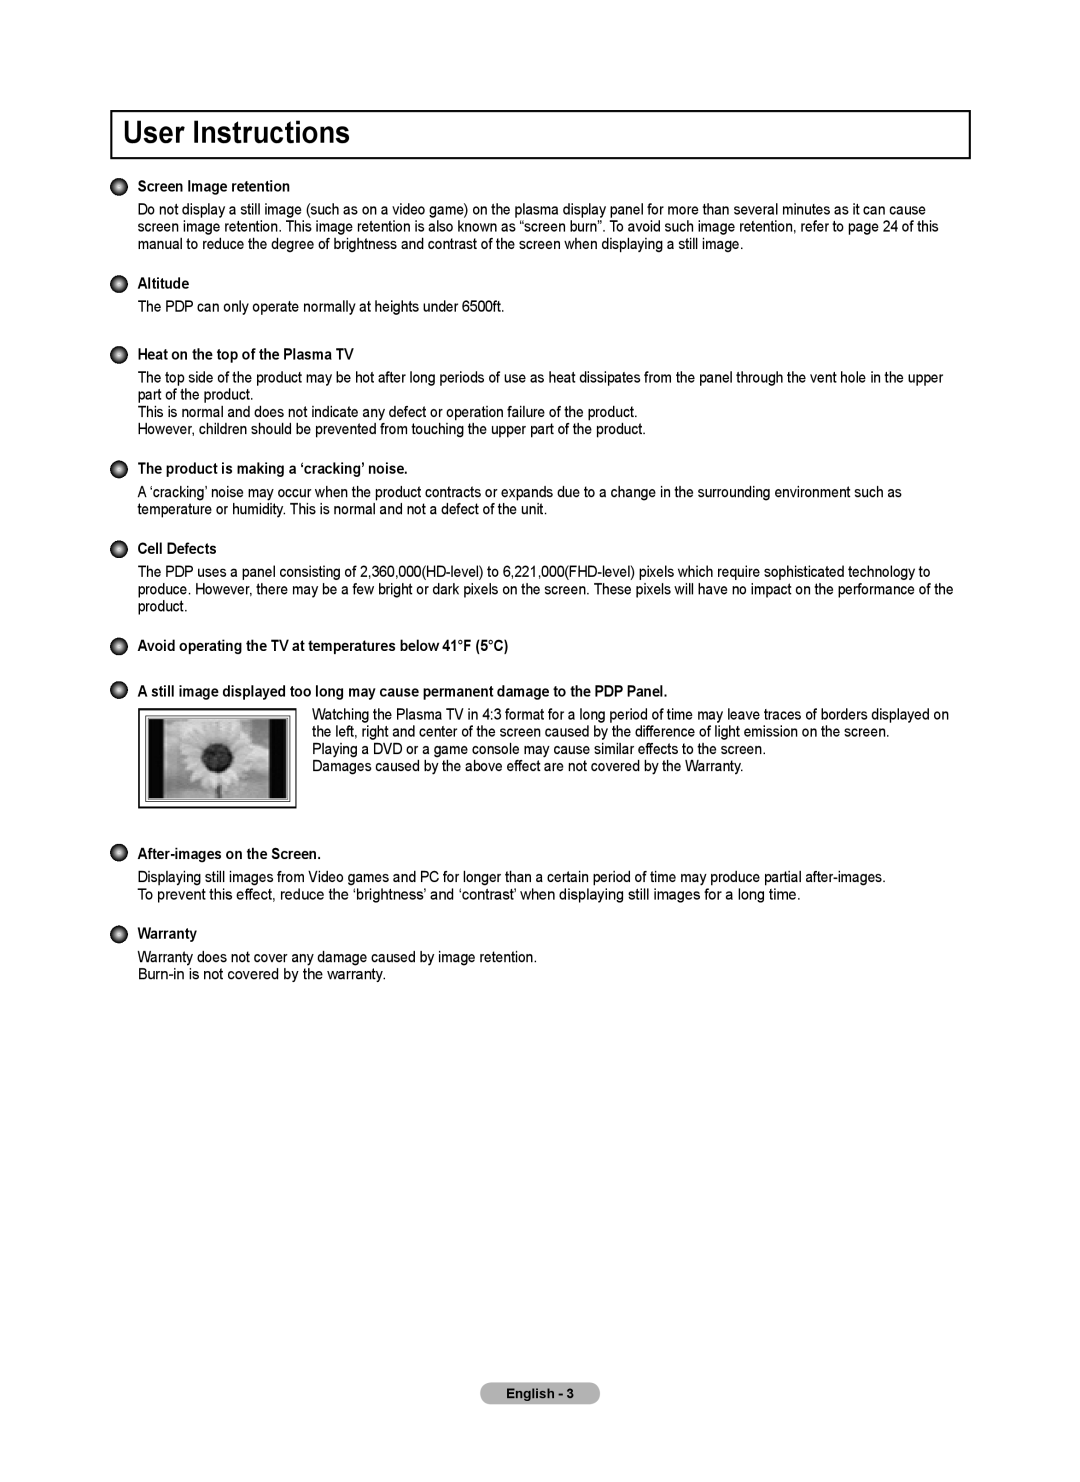 Samsung BN68-02426A-00 User Instructions, Screen Image retention, Altitude, Heat on the top of the Plasma TV, Cell Defects 